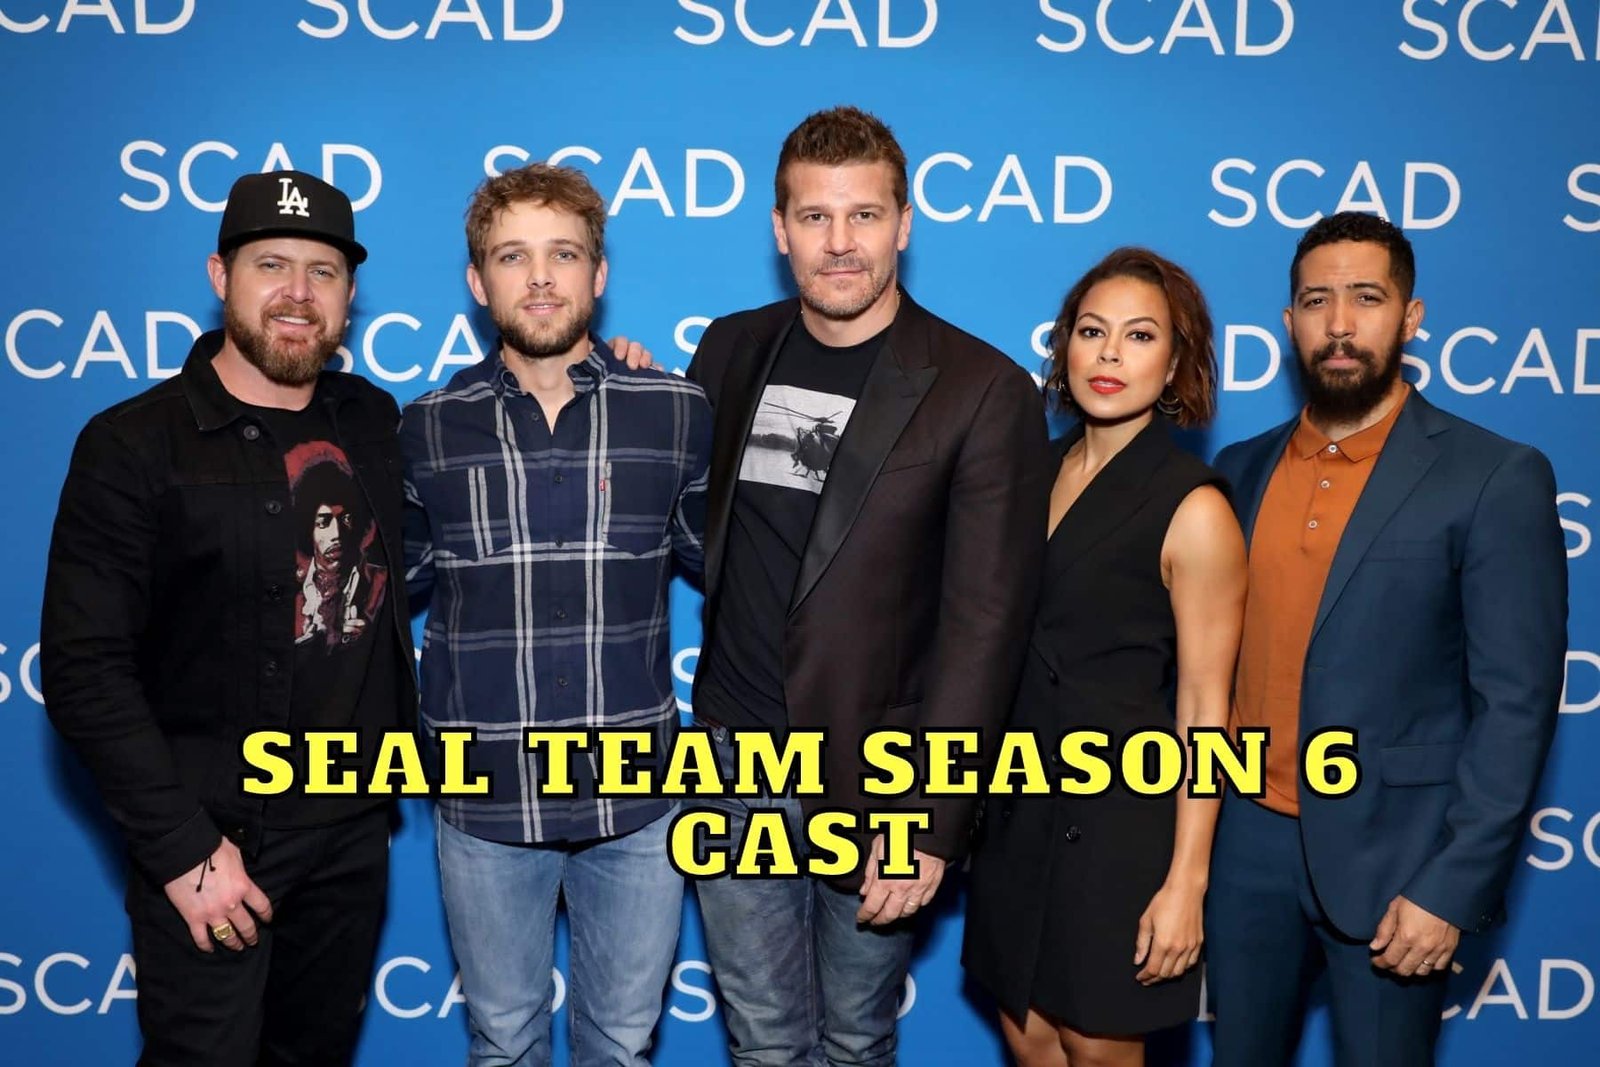 Seal Team Season 6 Cast - Ages, Partners, Characters